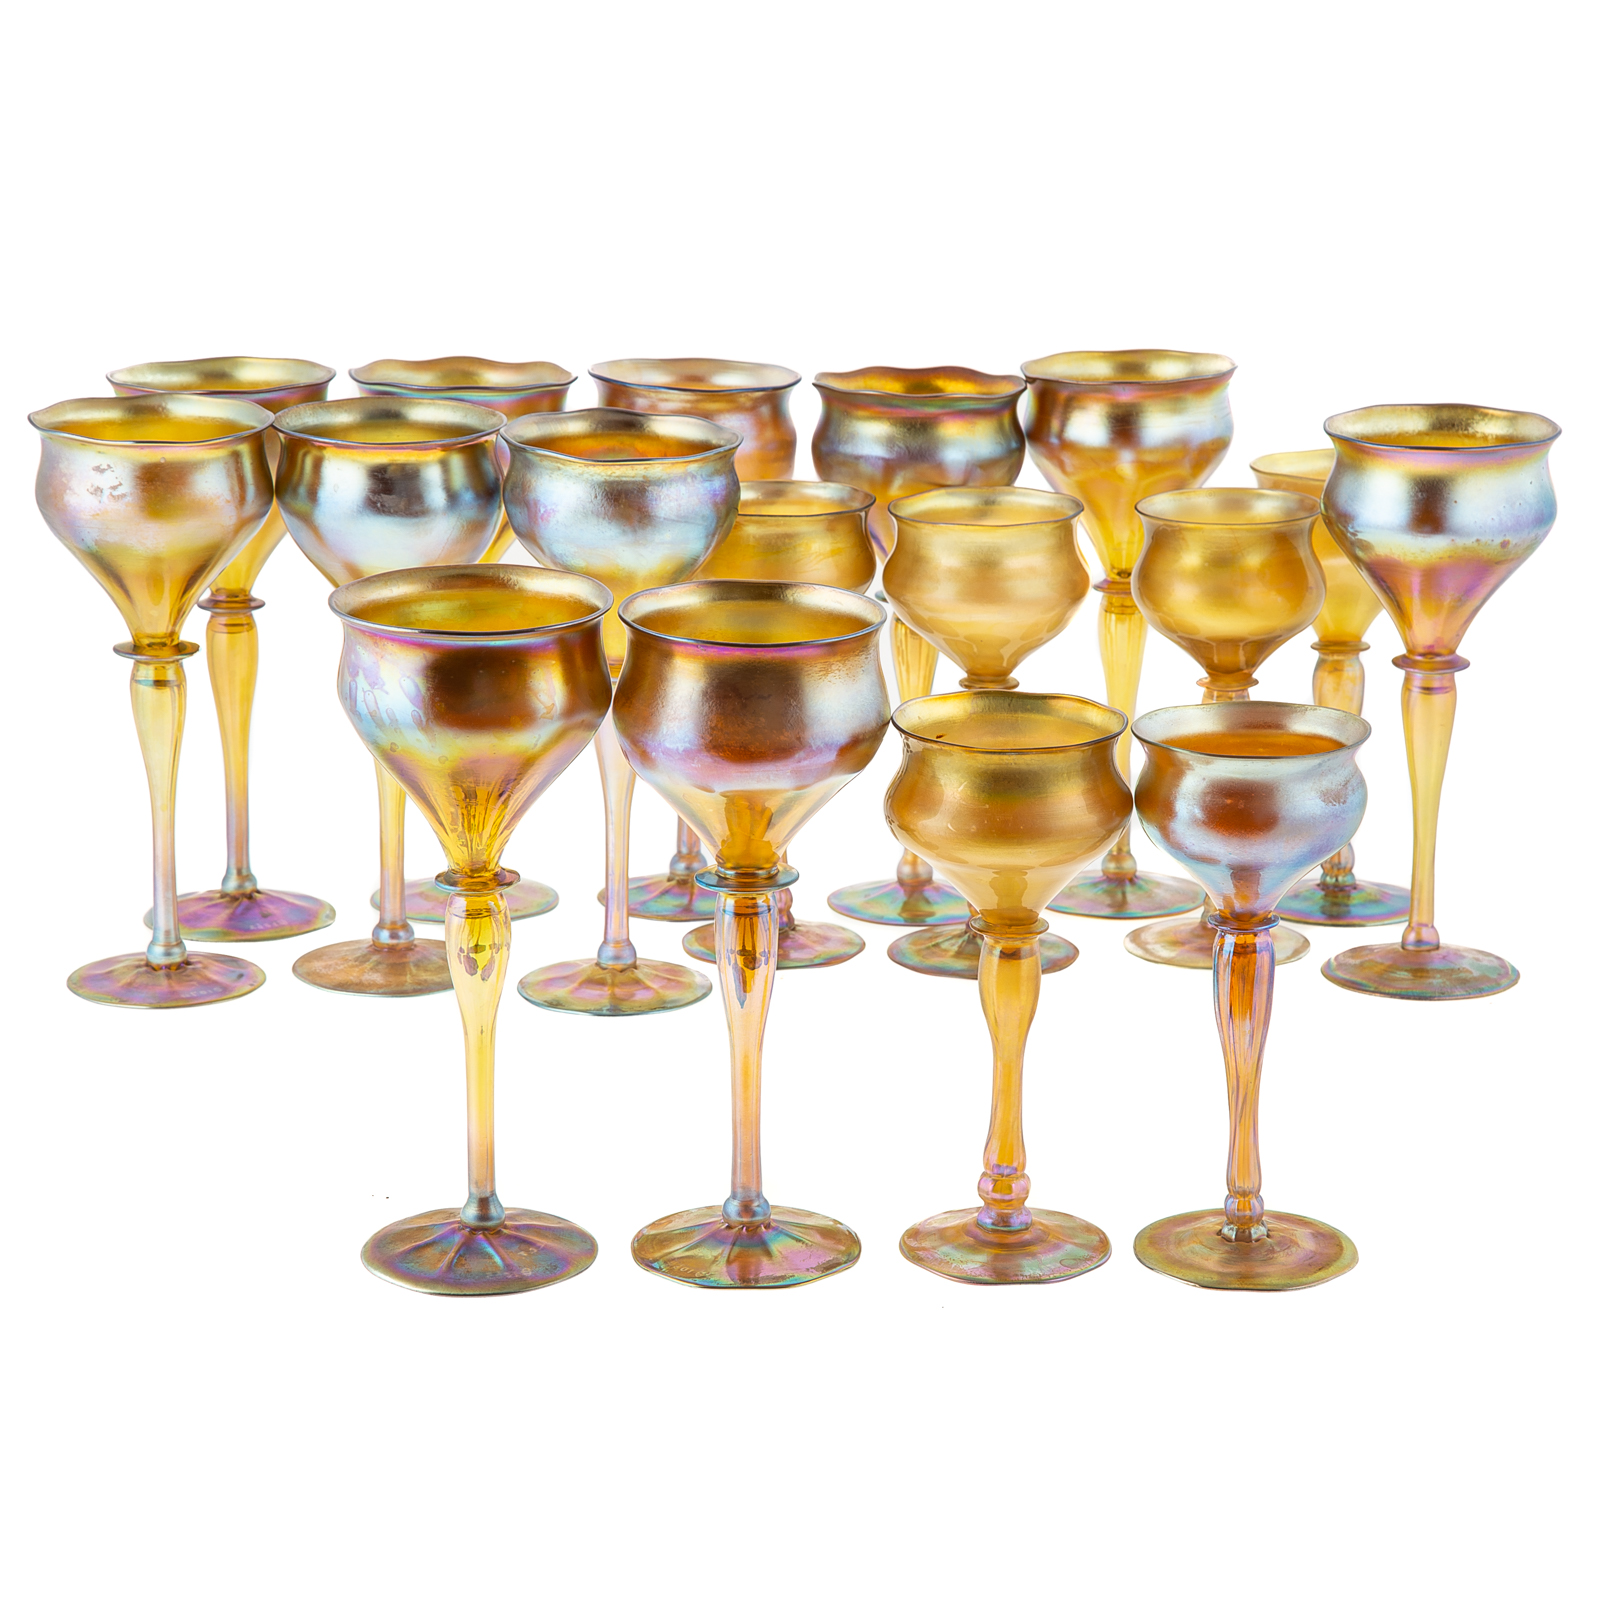 SET OF 17 TIFFANY FAVRILLE GLASS 36a029